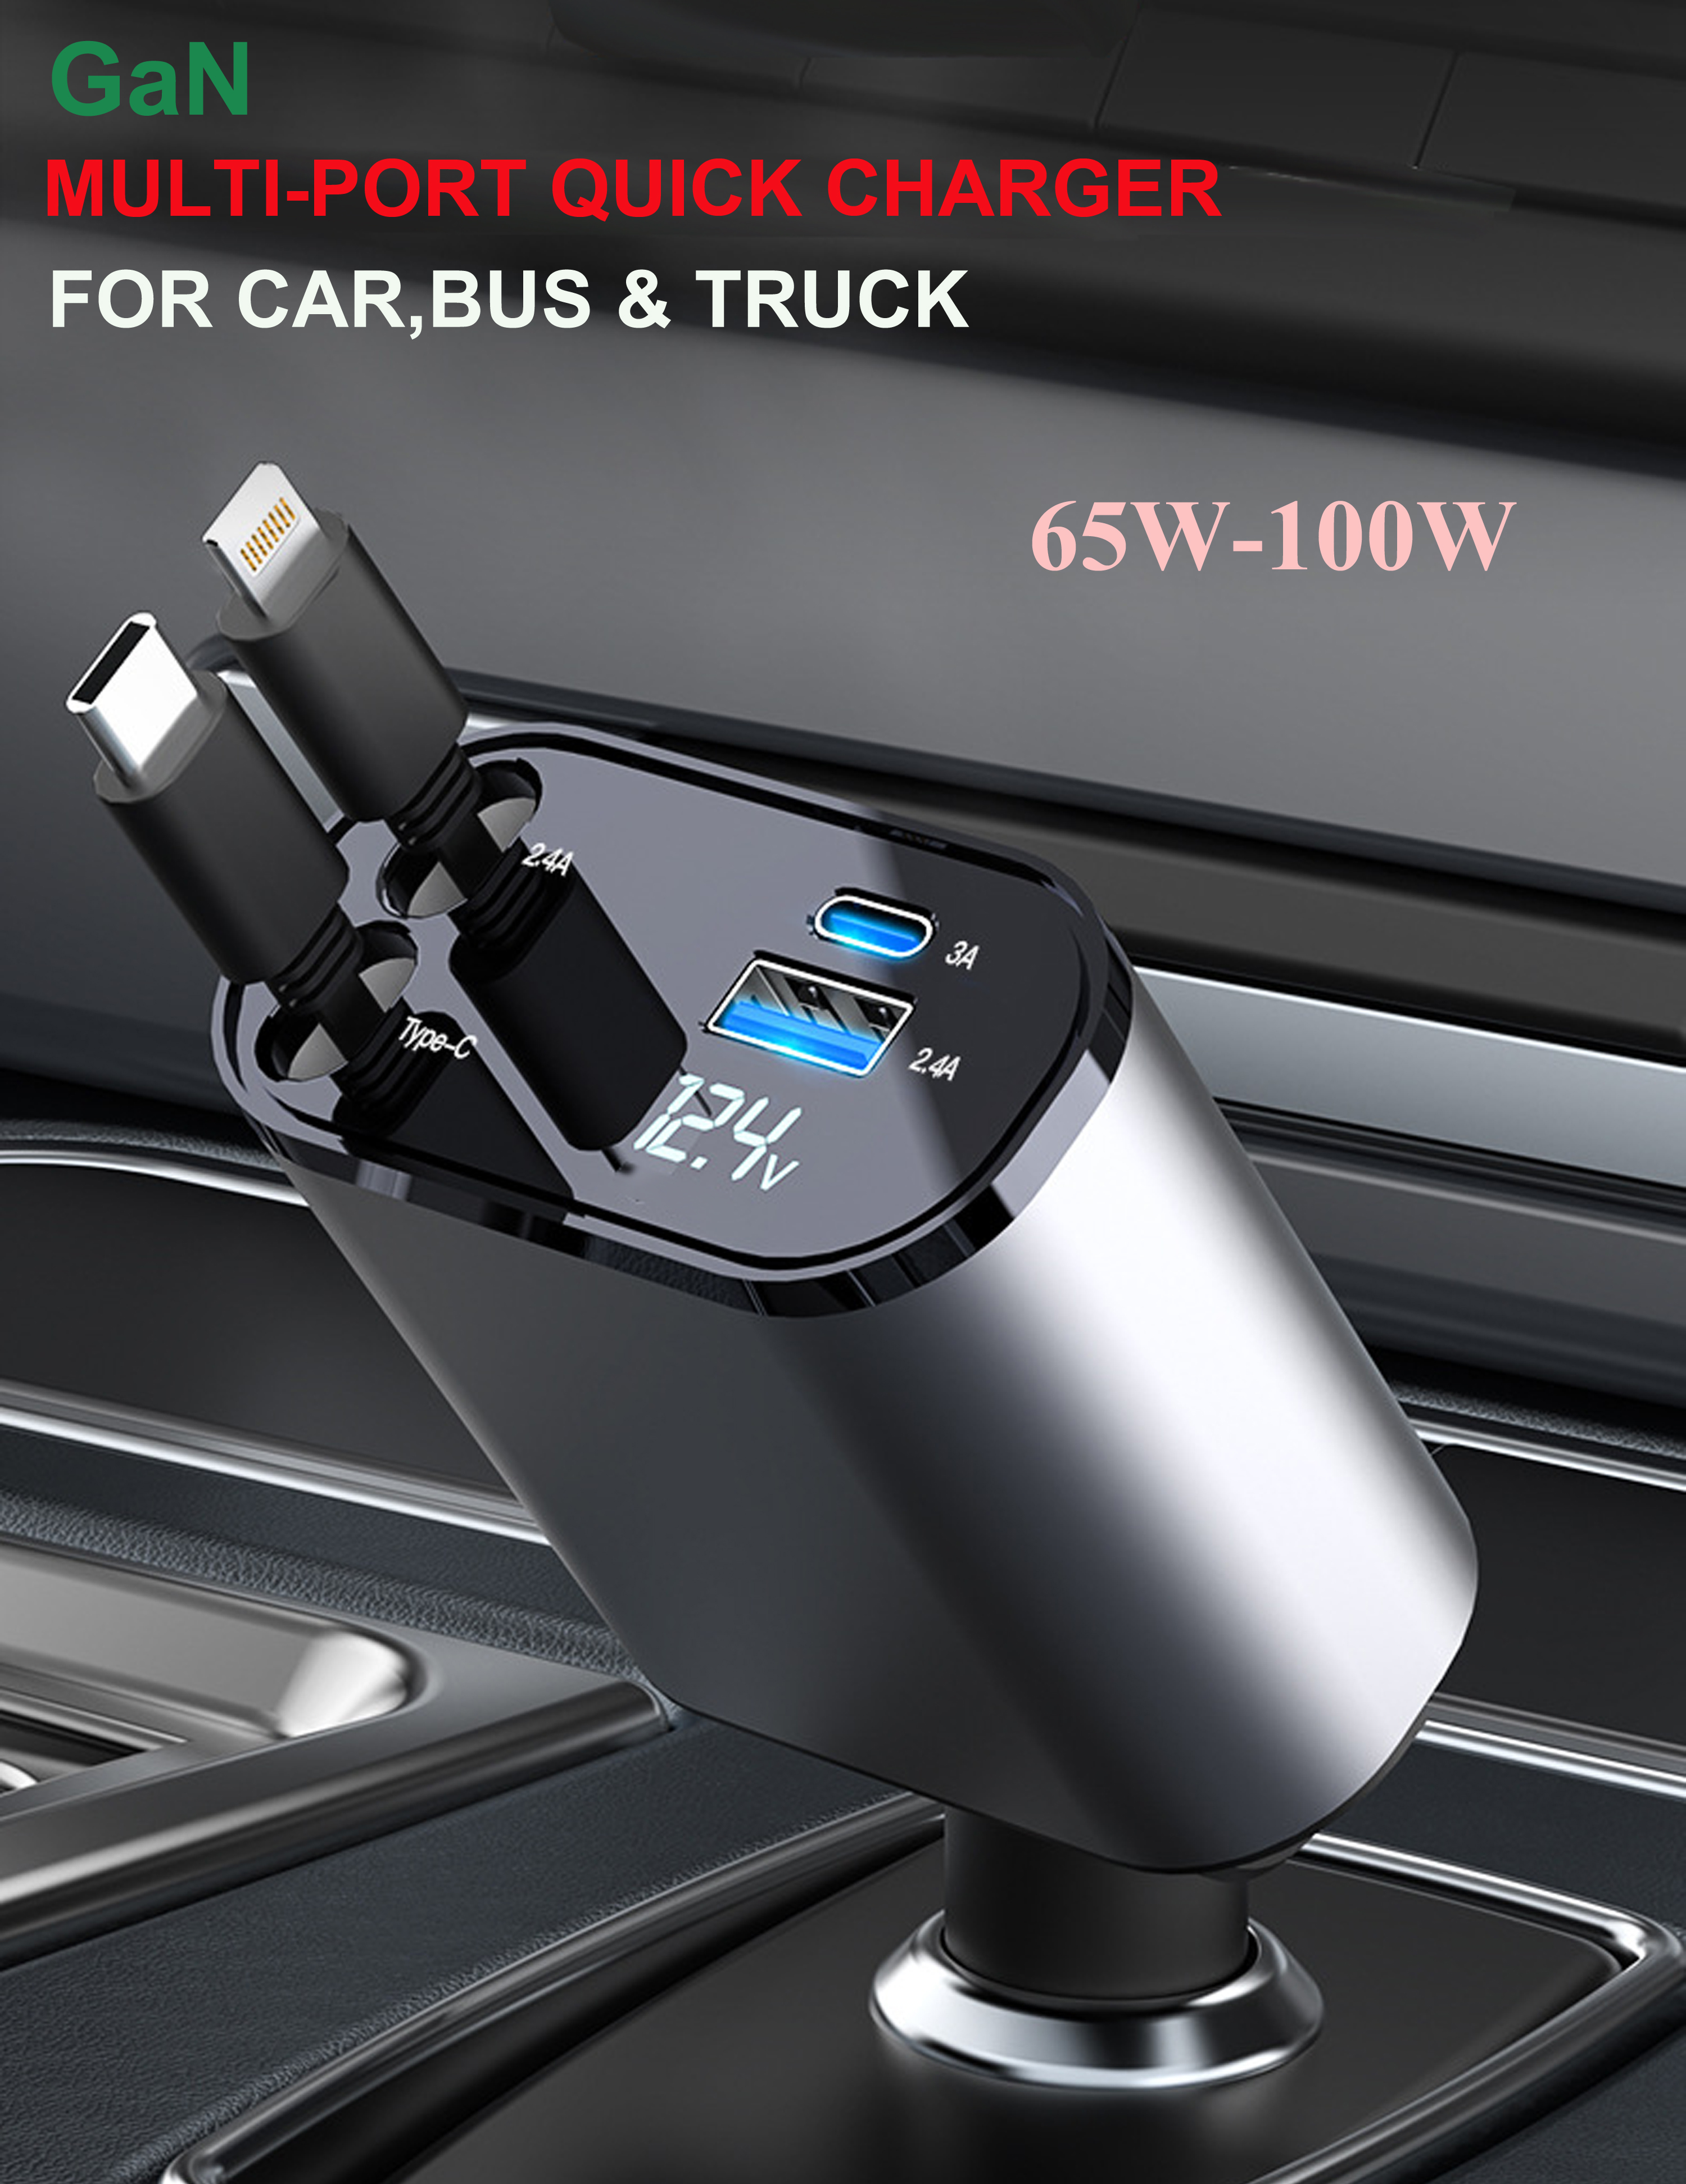 100W Car Charger, Quick Charger, Gan Charger, Cigarret charger